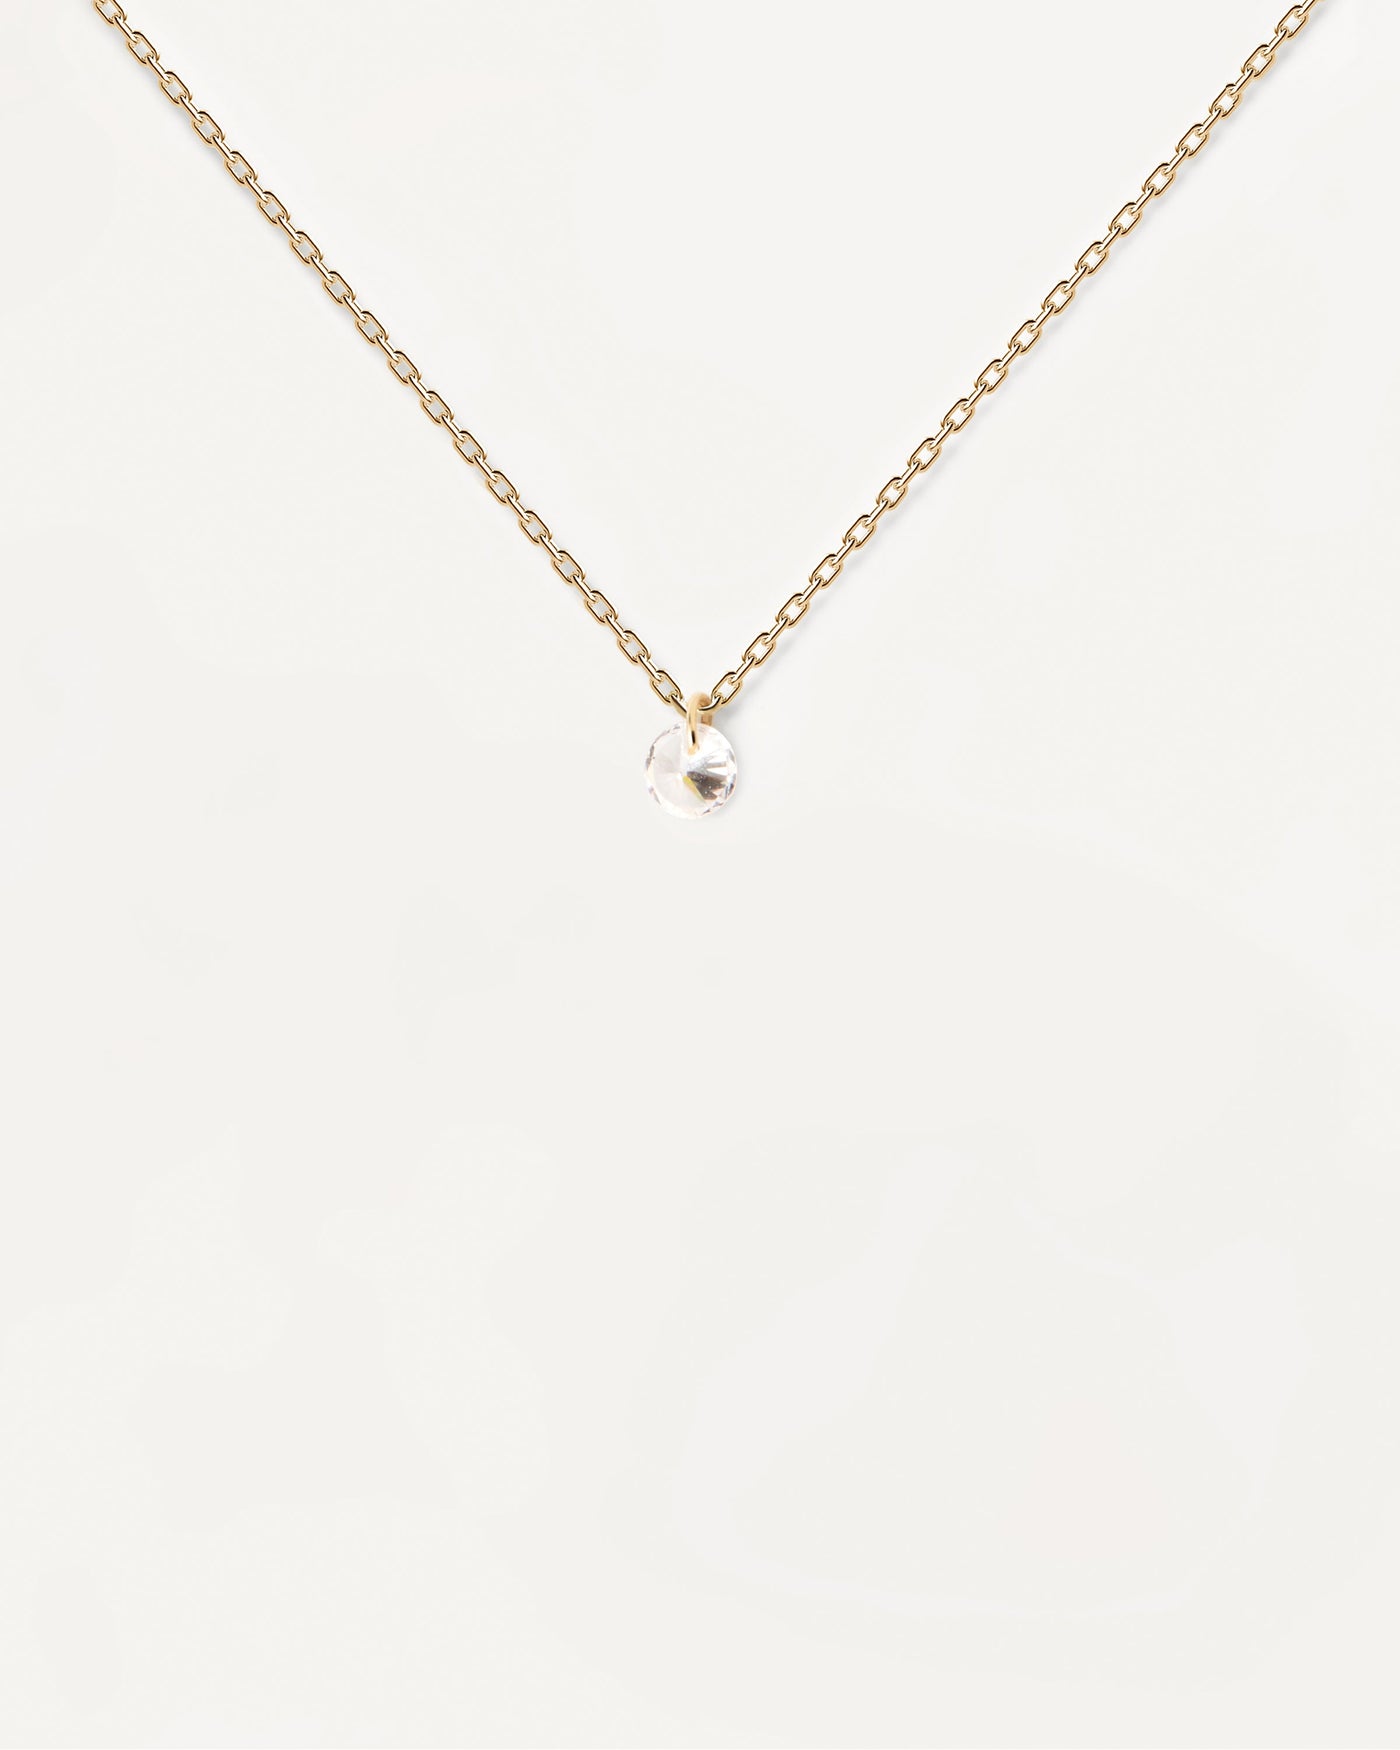 Joy solitary Necklace - 
  
    Sterling Silver / 18K Gold plating
  
